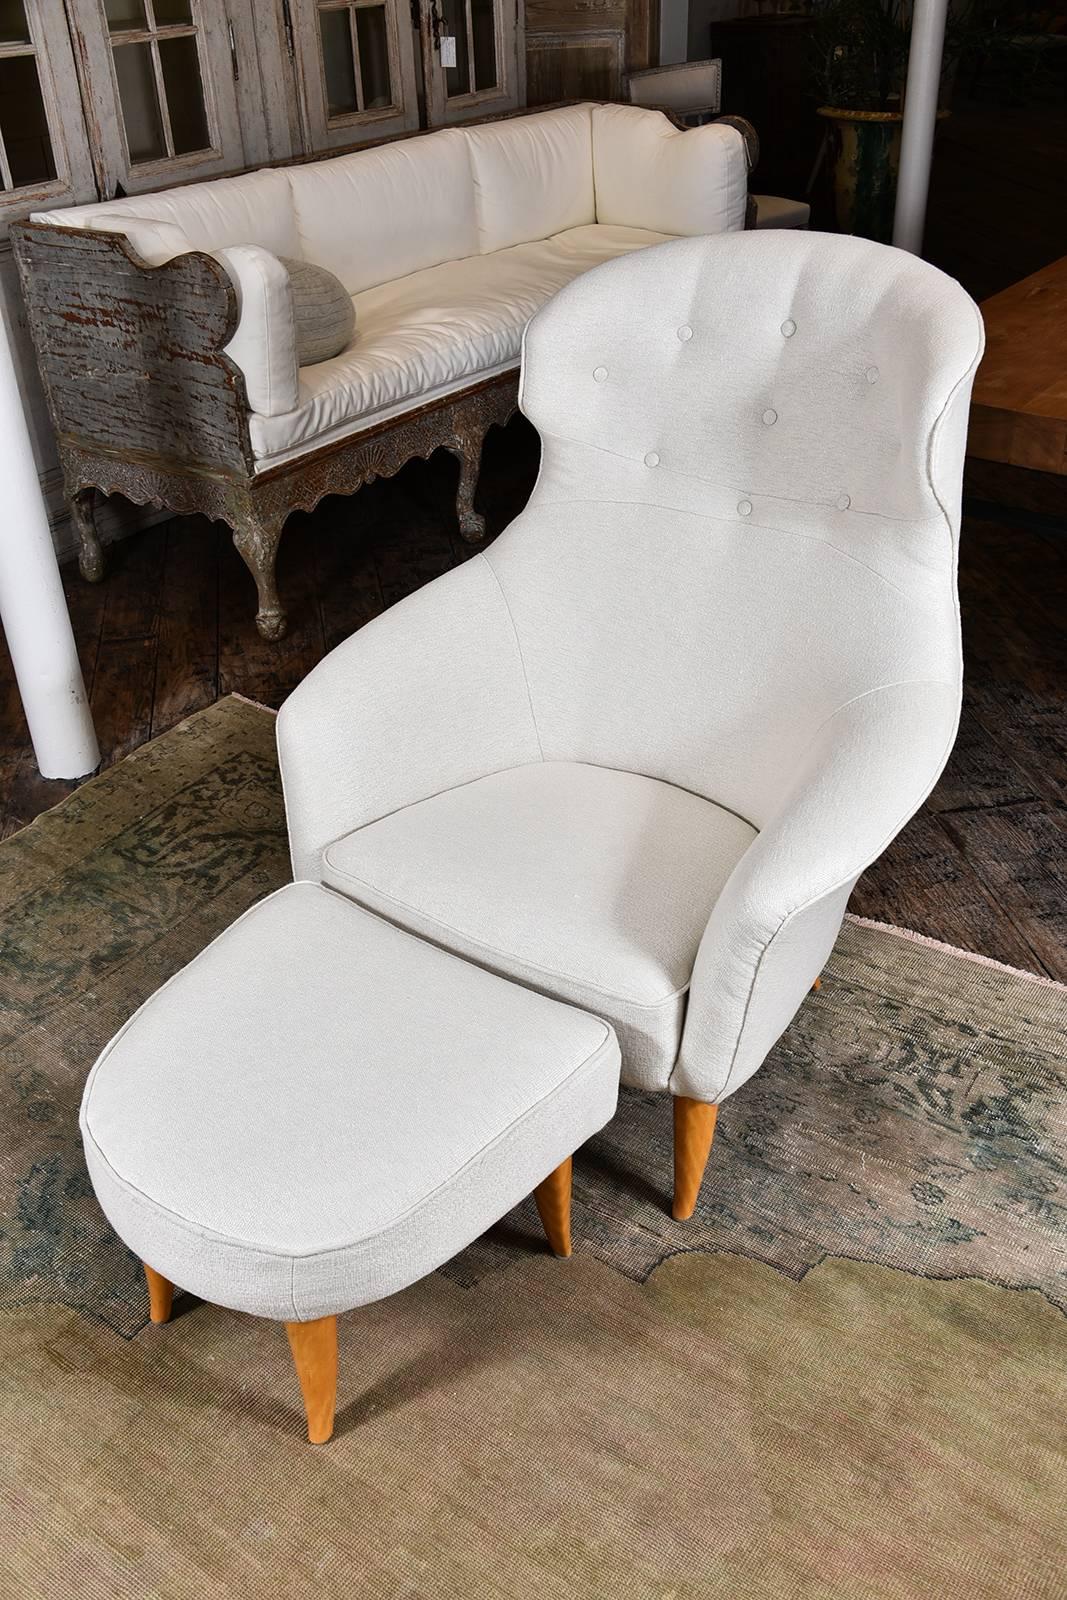 Swedish Lounge Chair with Ottoman by Kerstin Hörlin-Holmquist